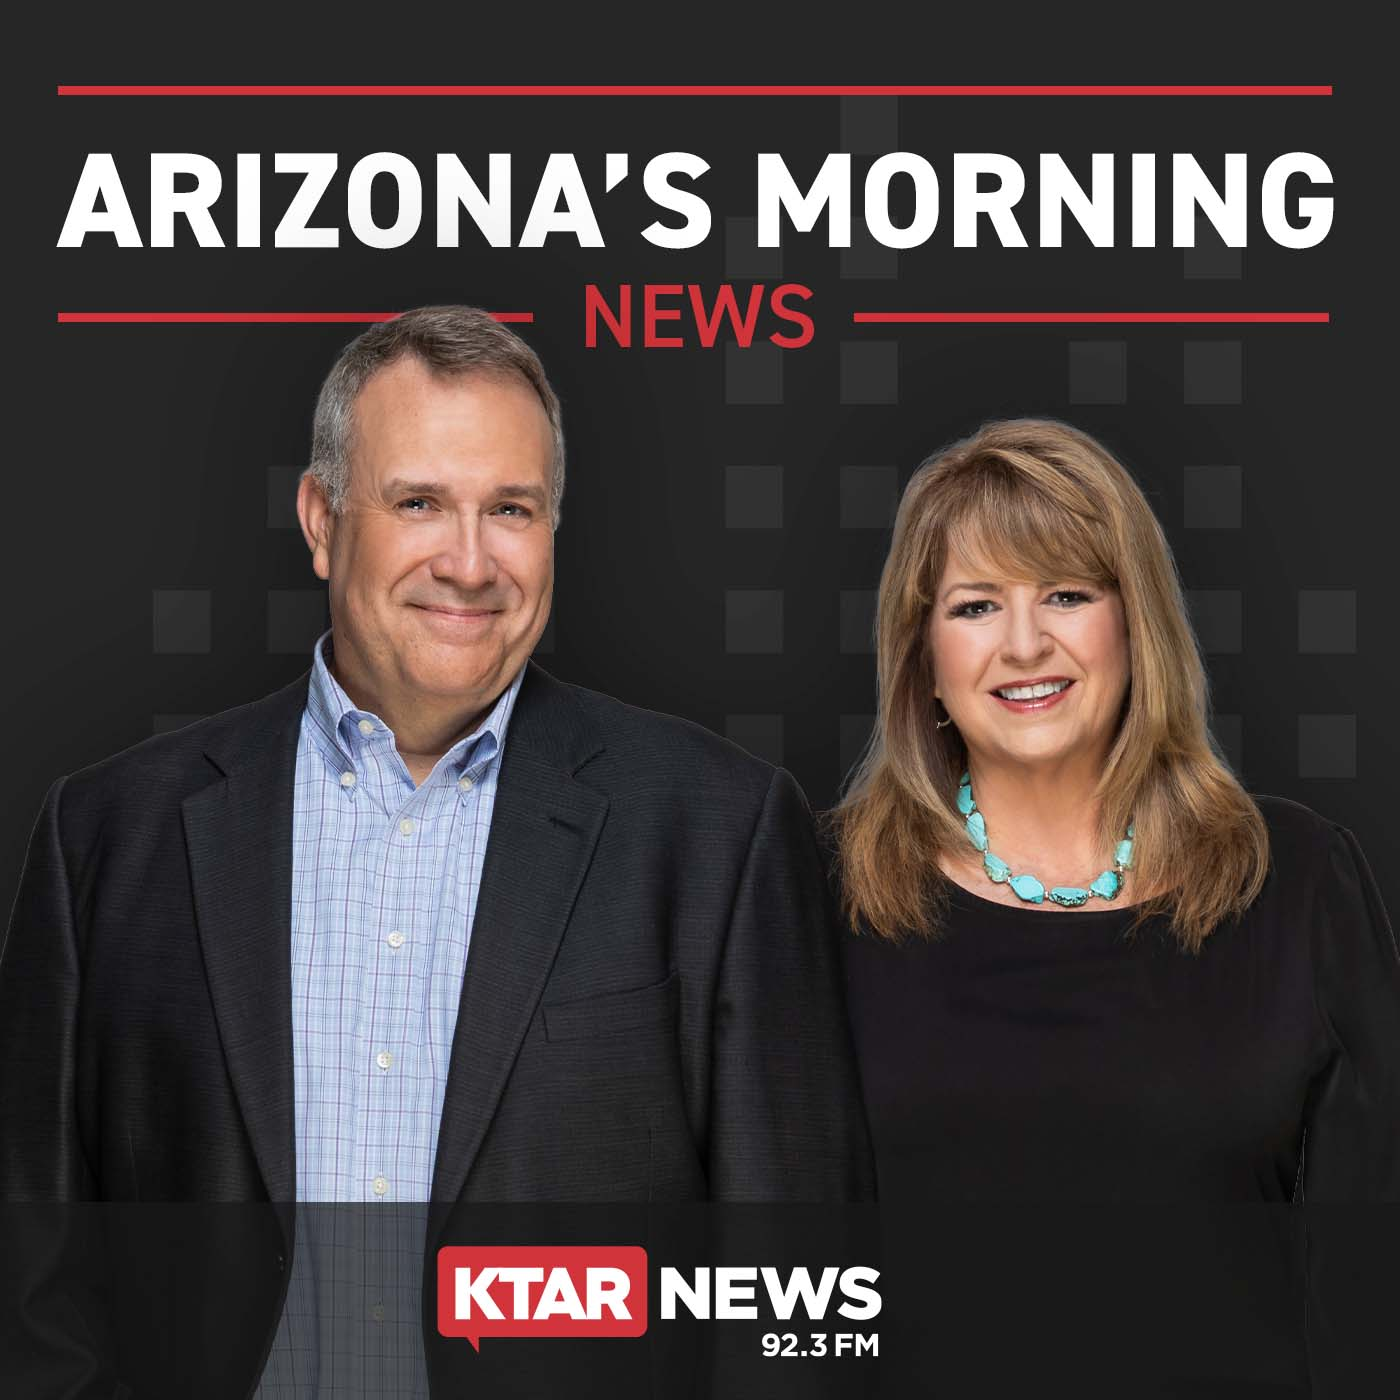 Inflation and new jobs in Arizona